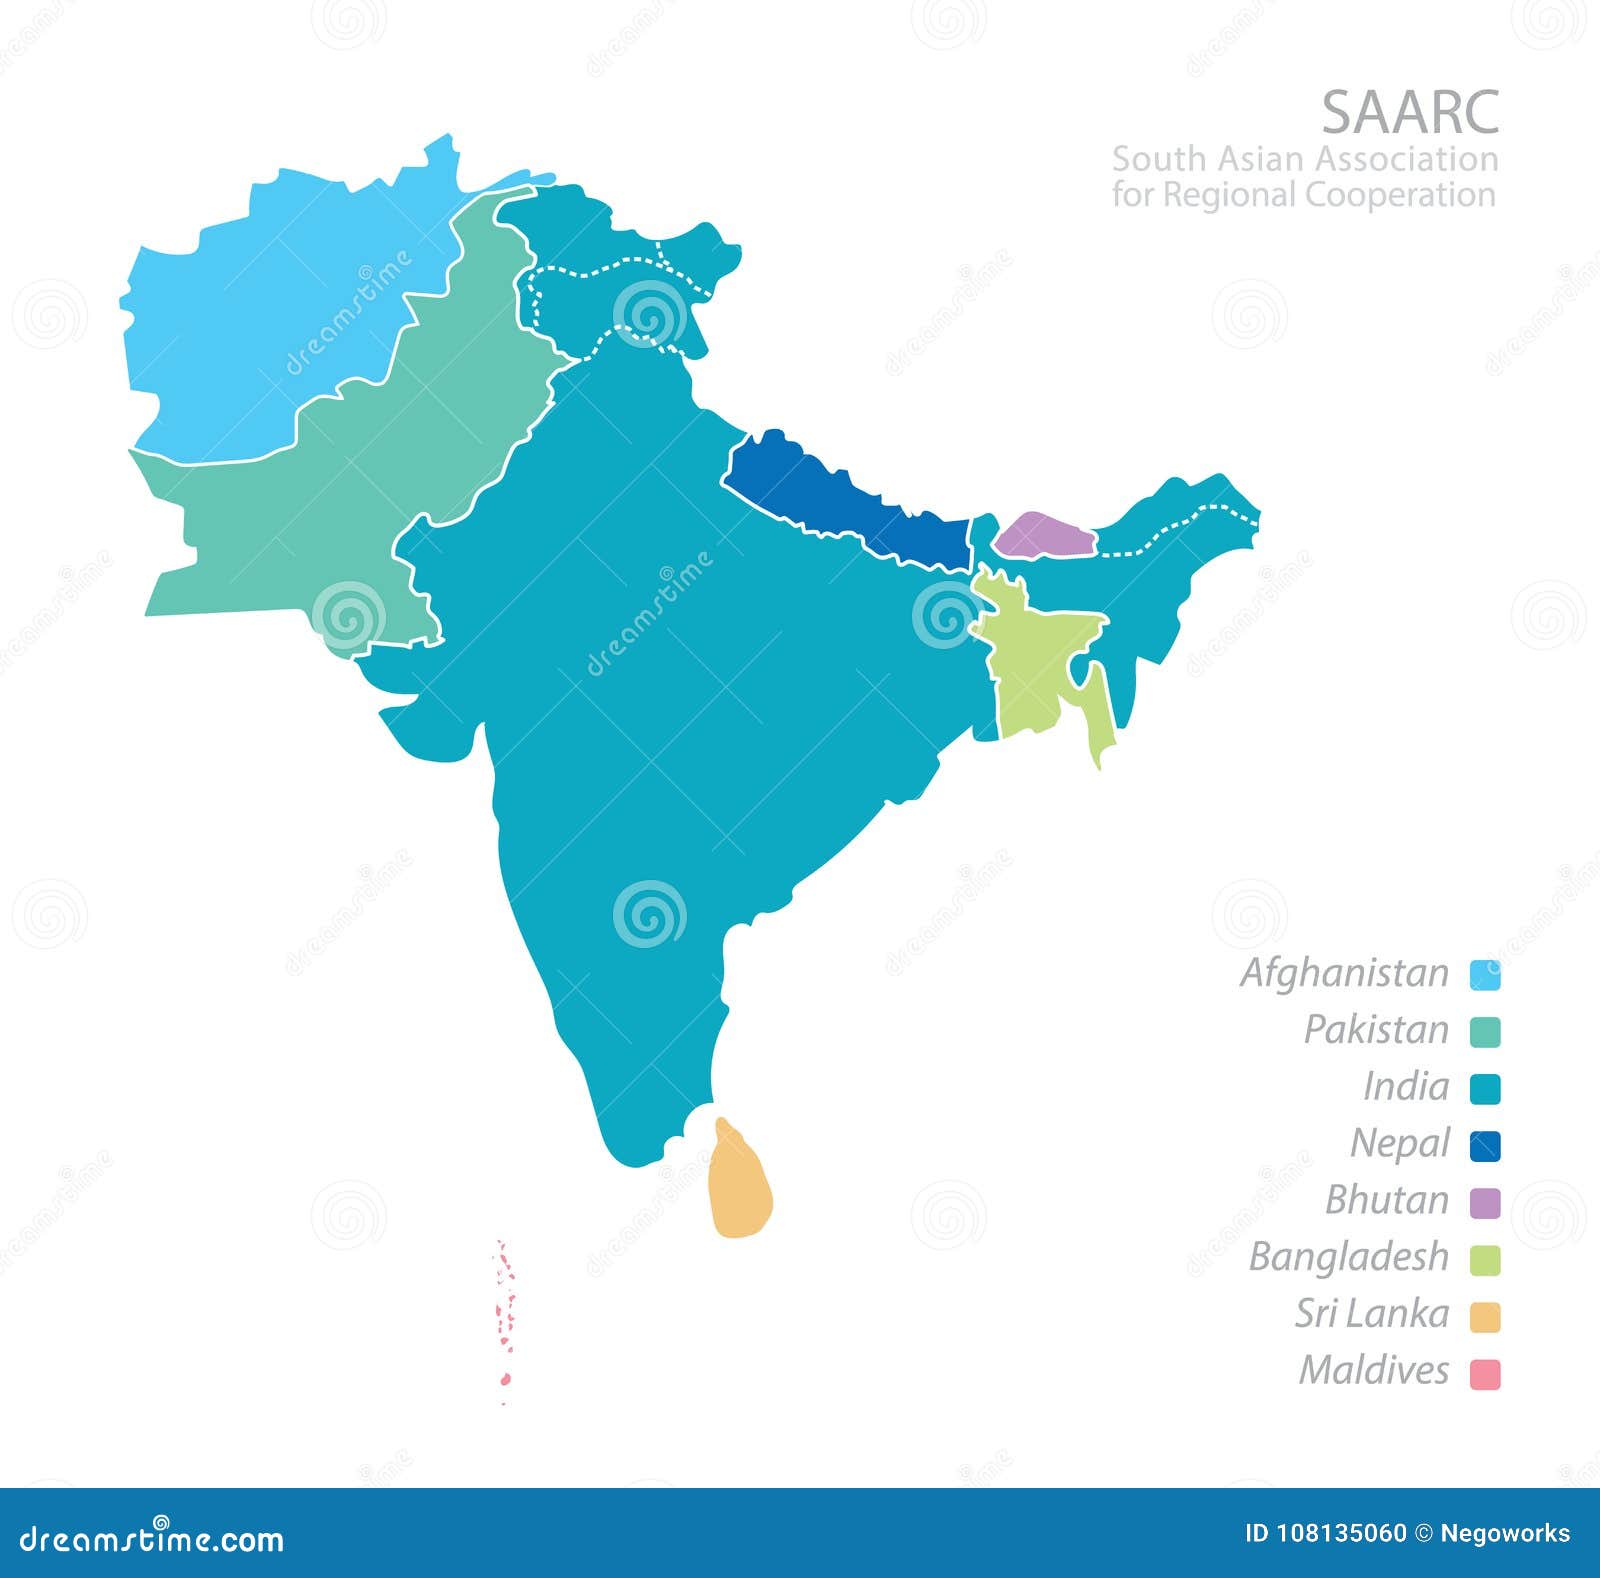 map of south asian association for regional cooperation saarc